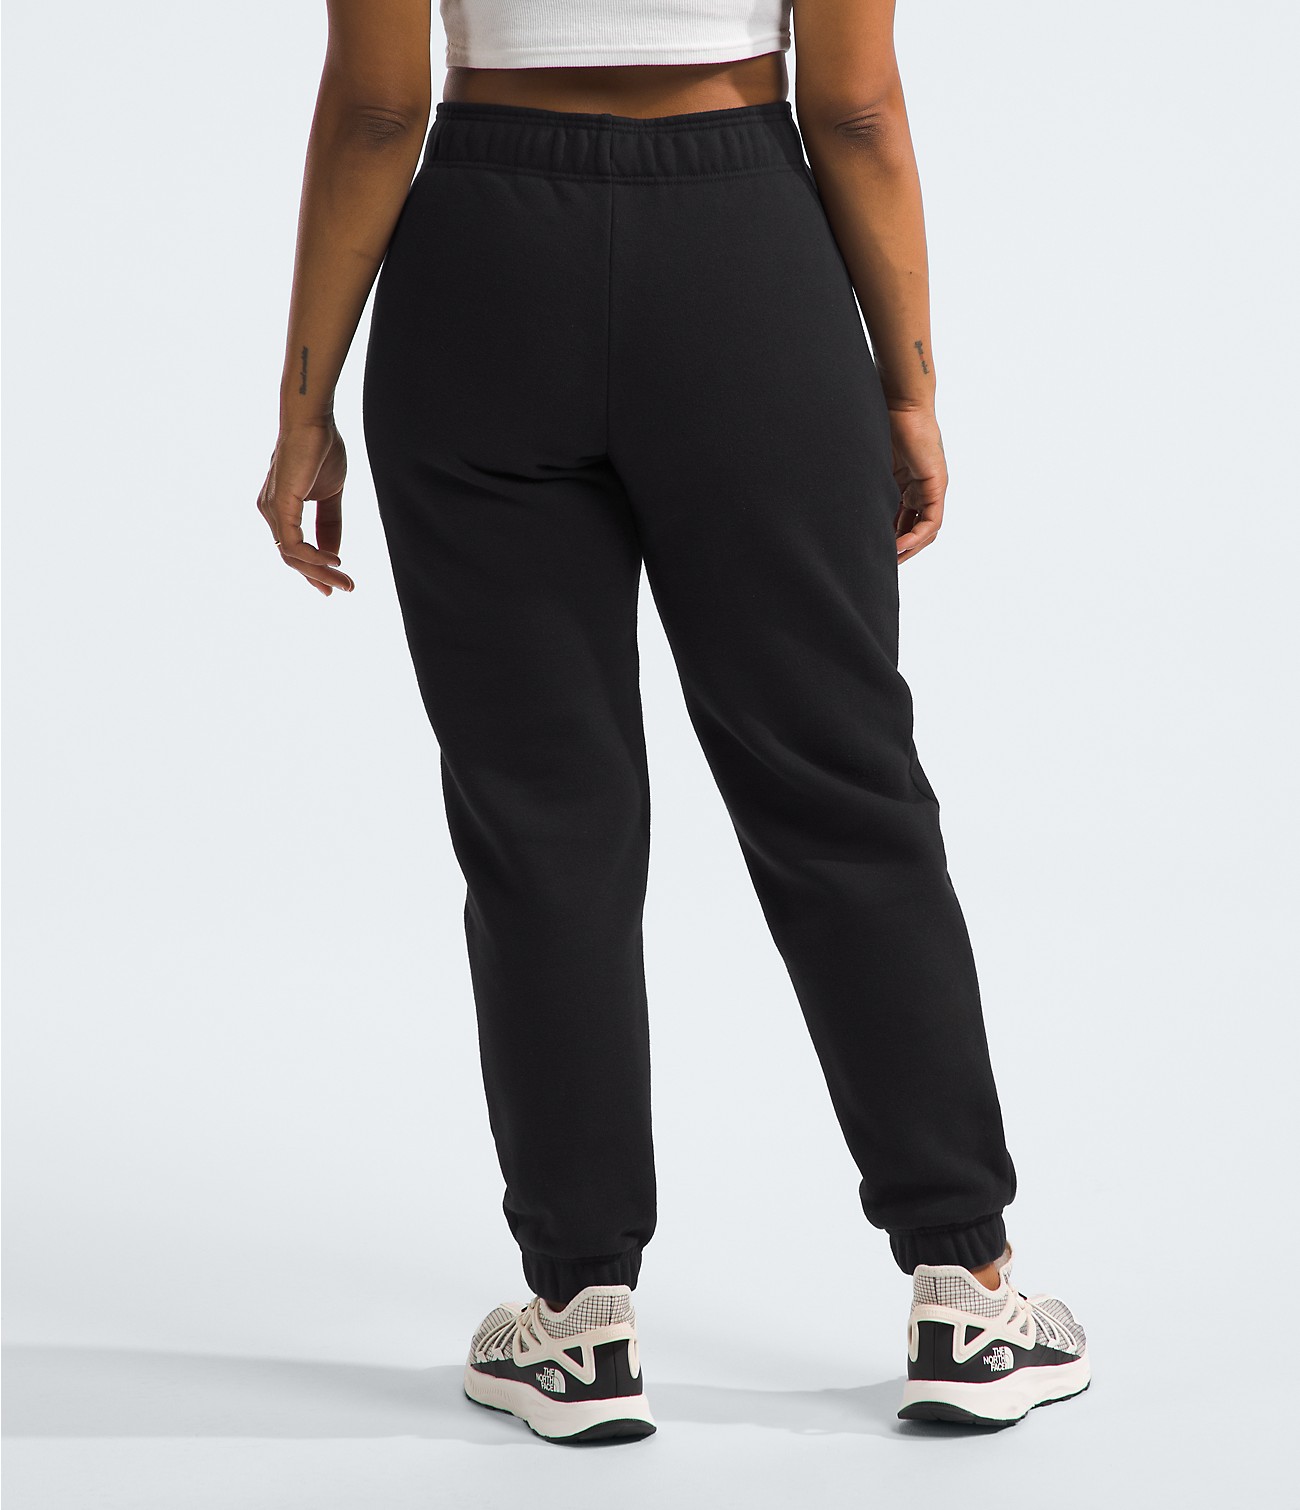 Women’s Heavyweight Relaxed Fit Sweatpants | The North Face